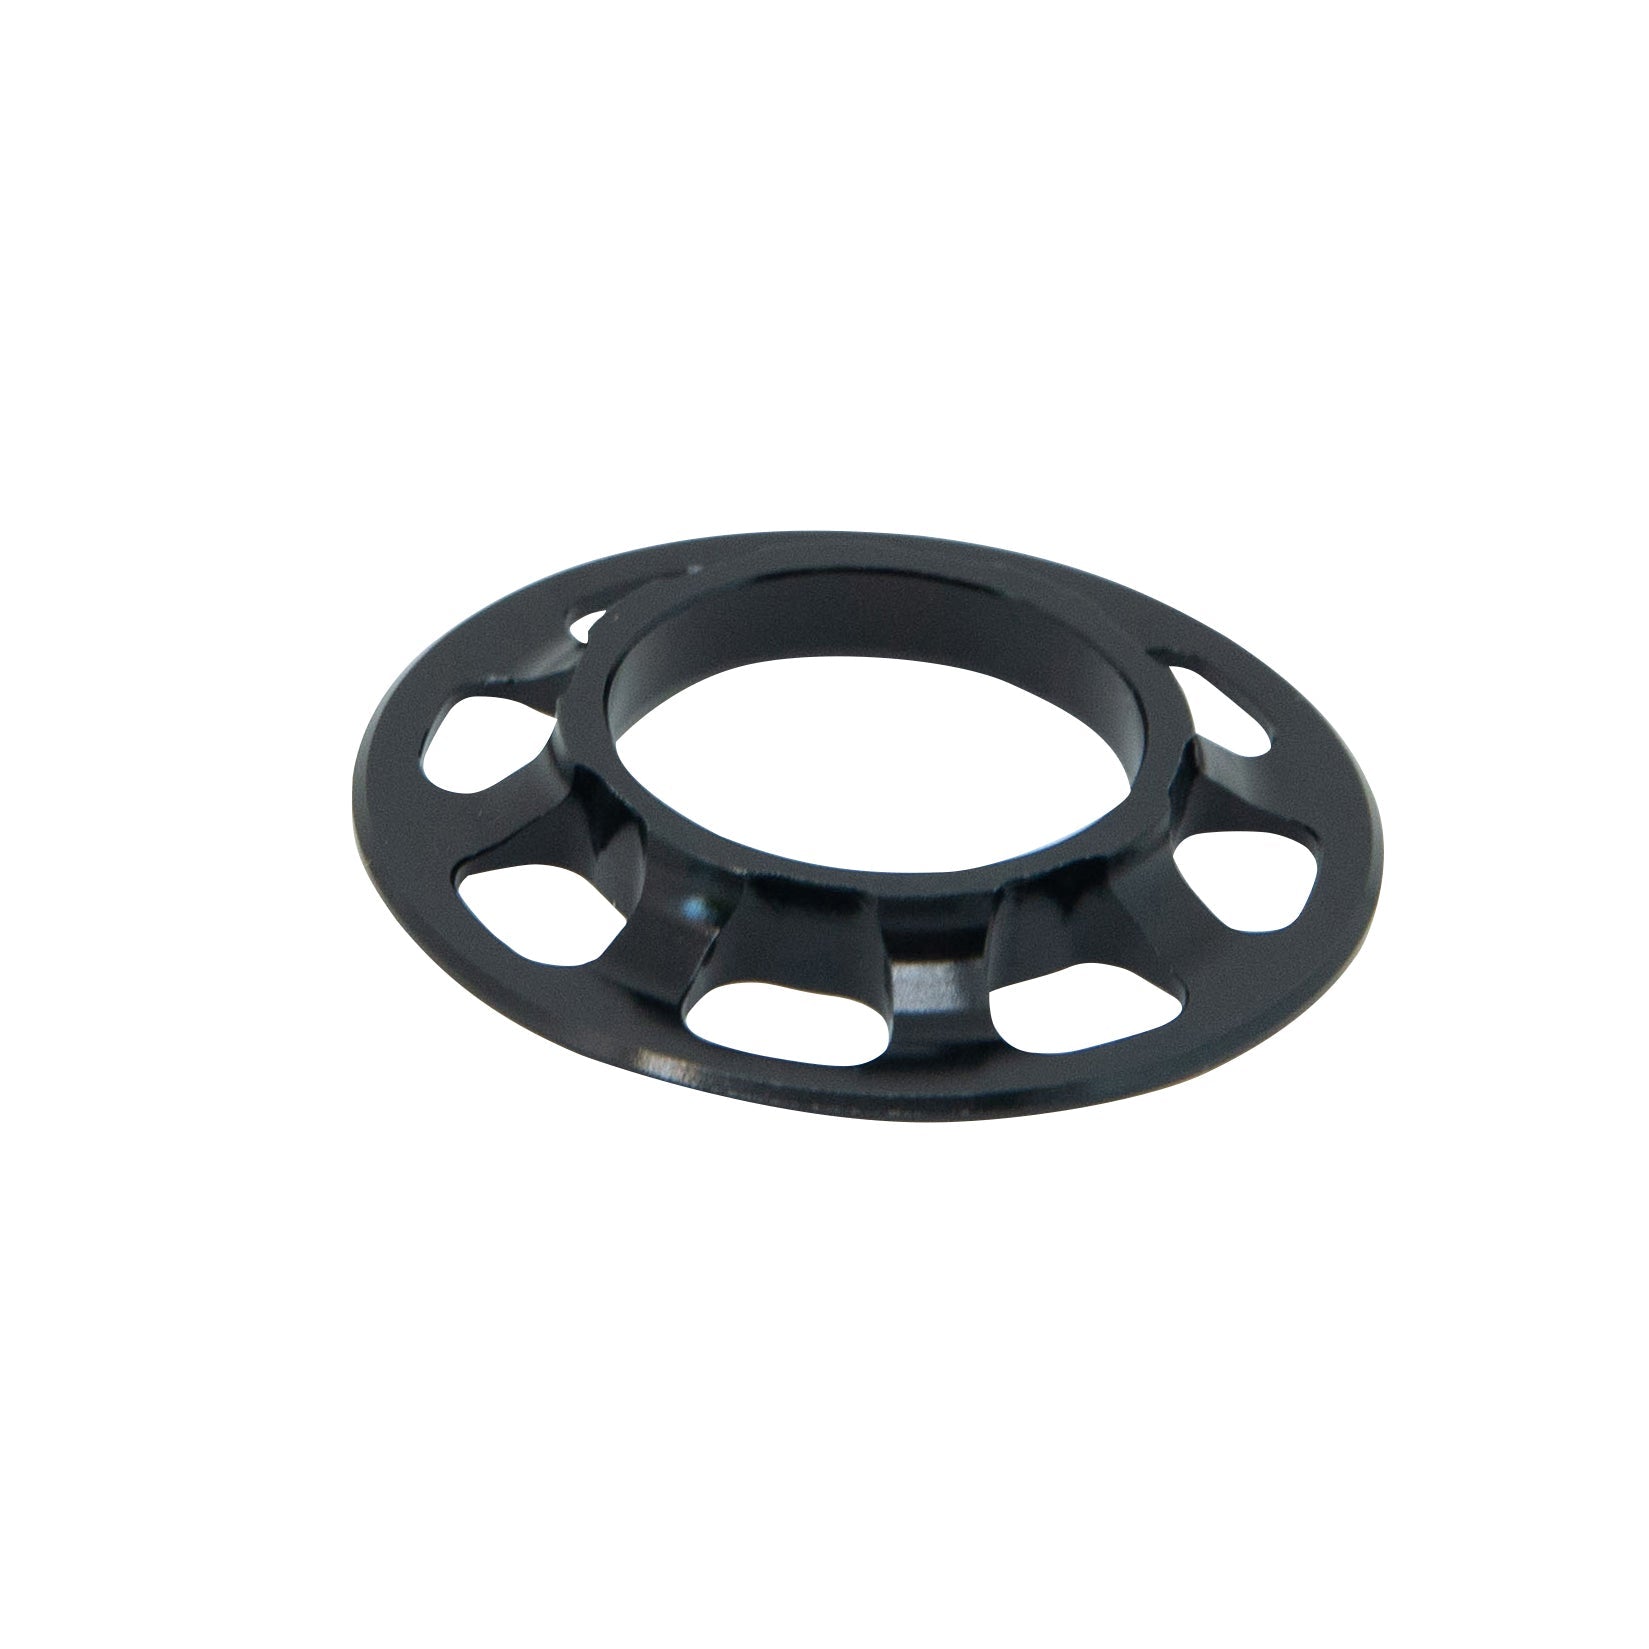 Chainstay/Seat Stay Bearing Spacer Maiden